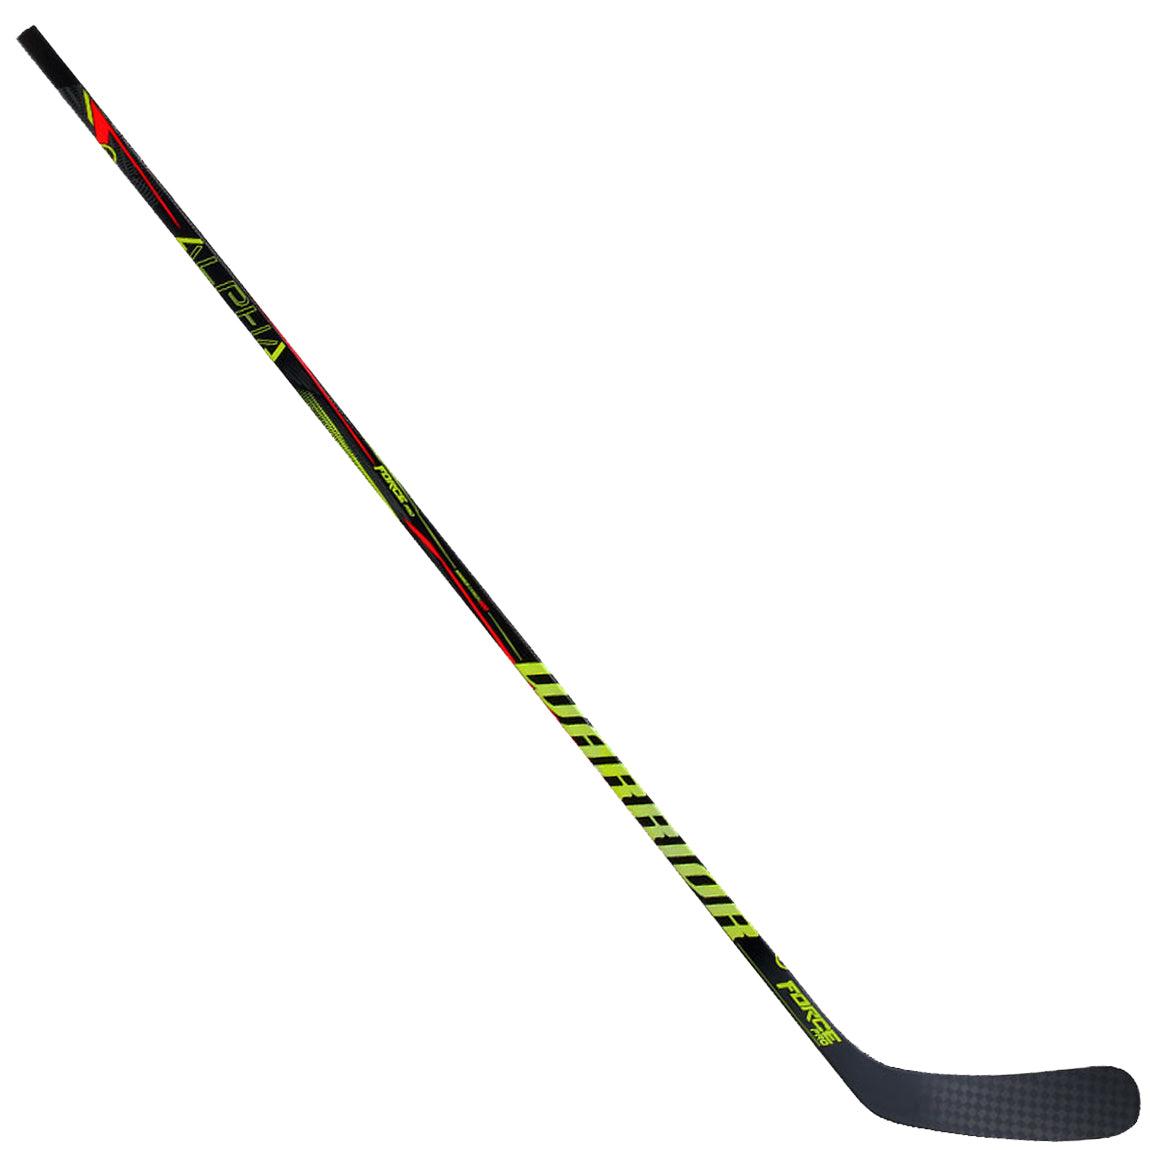 Alpha Force Pro Hockey Stick 2017 - Junior - Sports Excellence